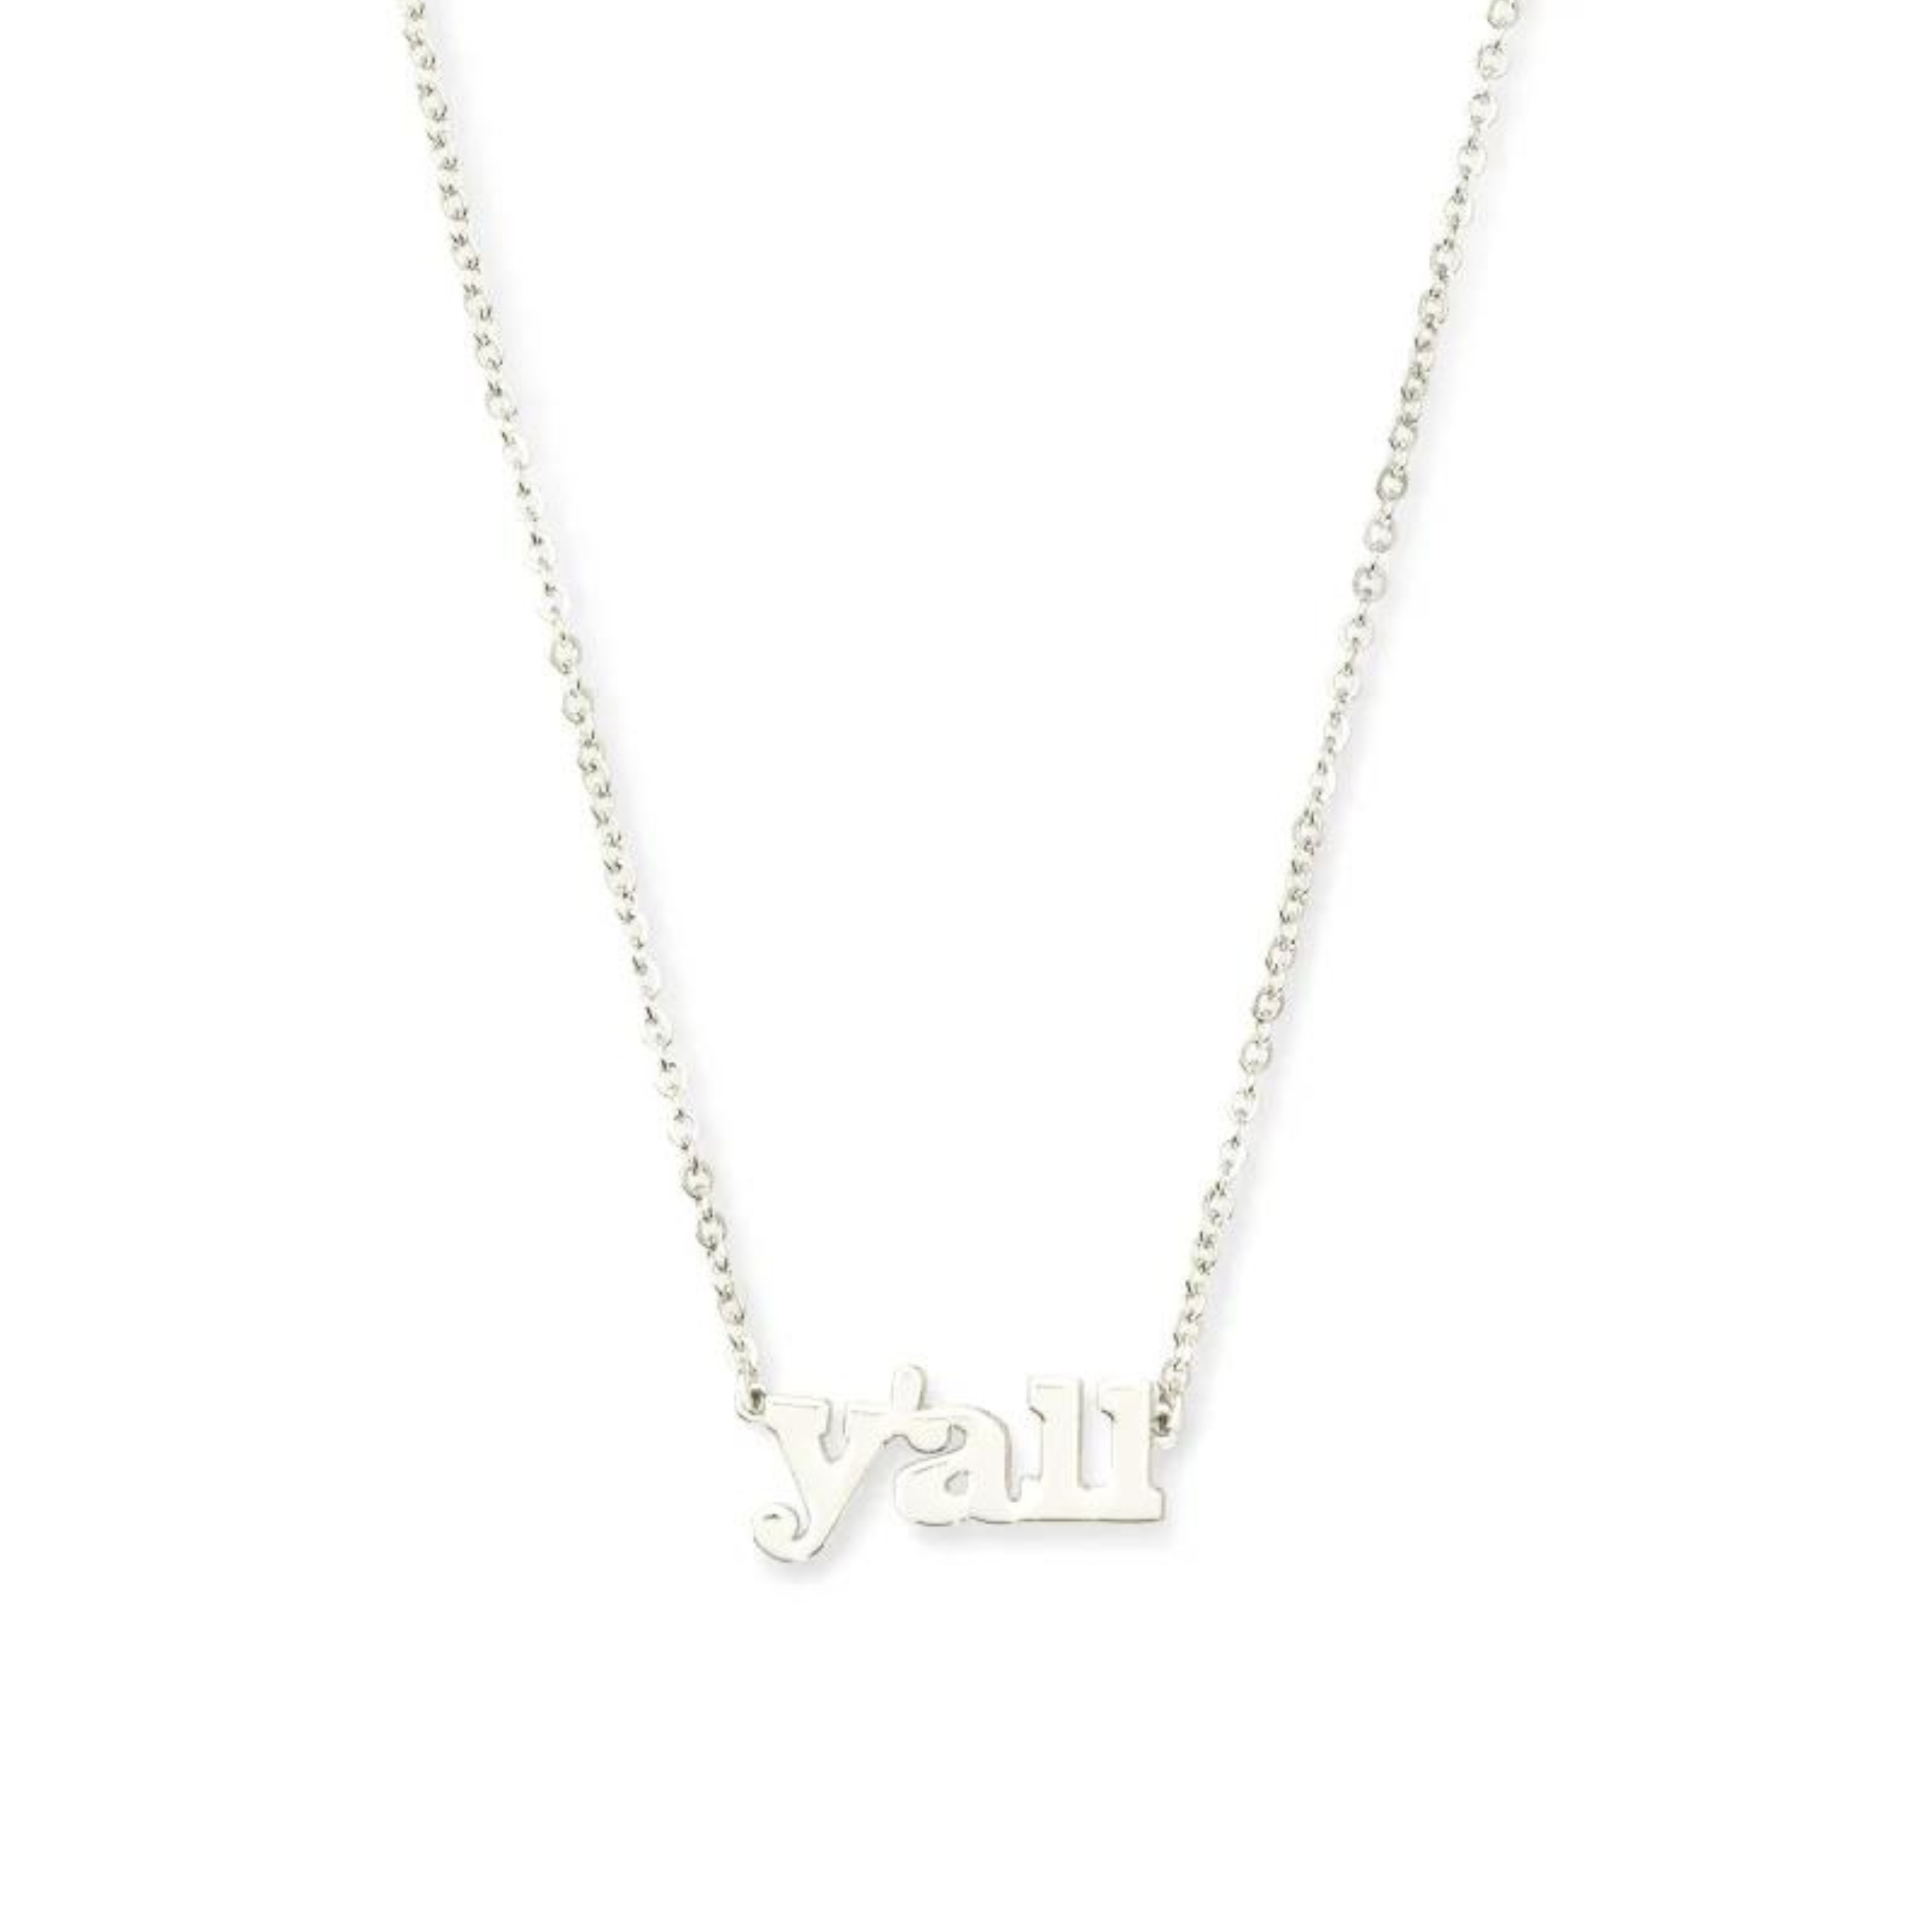 Silver necklaces that says y'all, pictured on a white background.